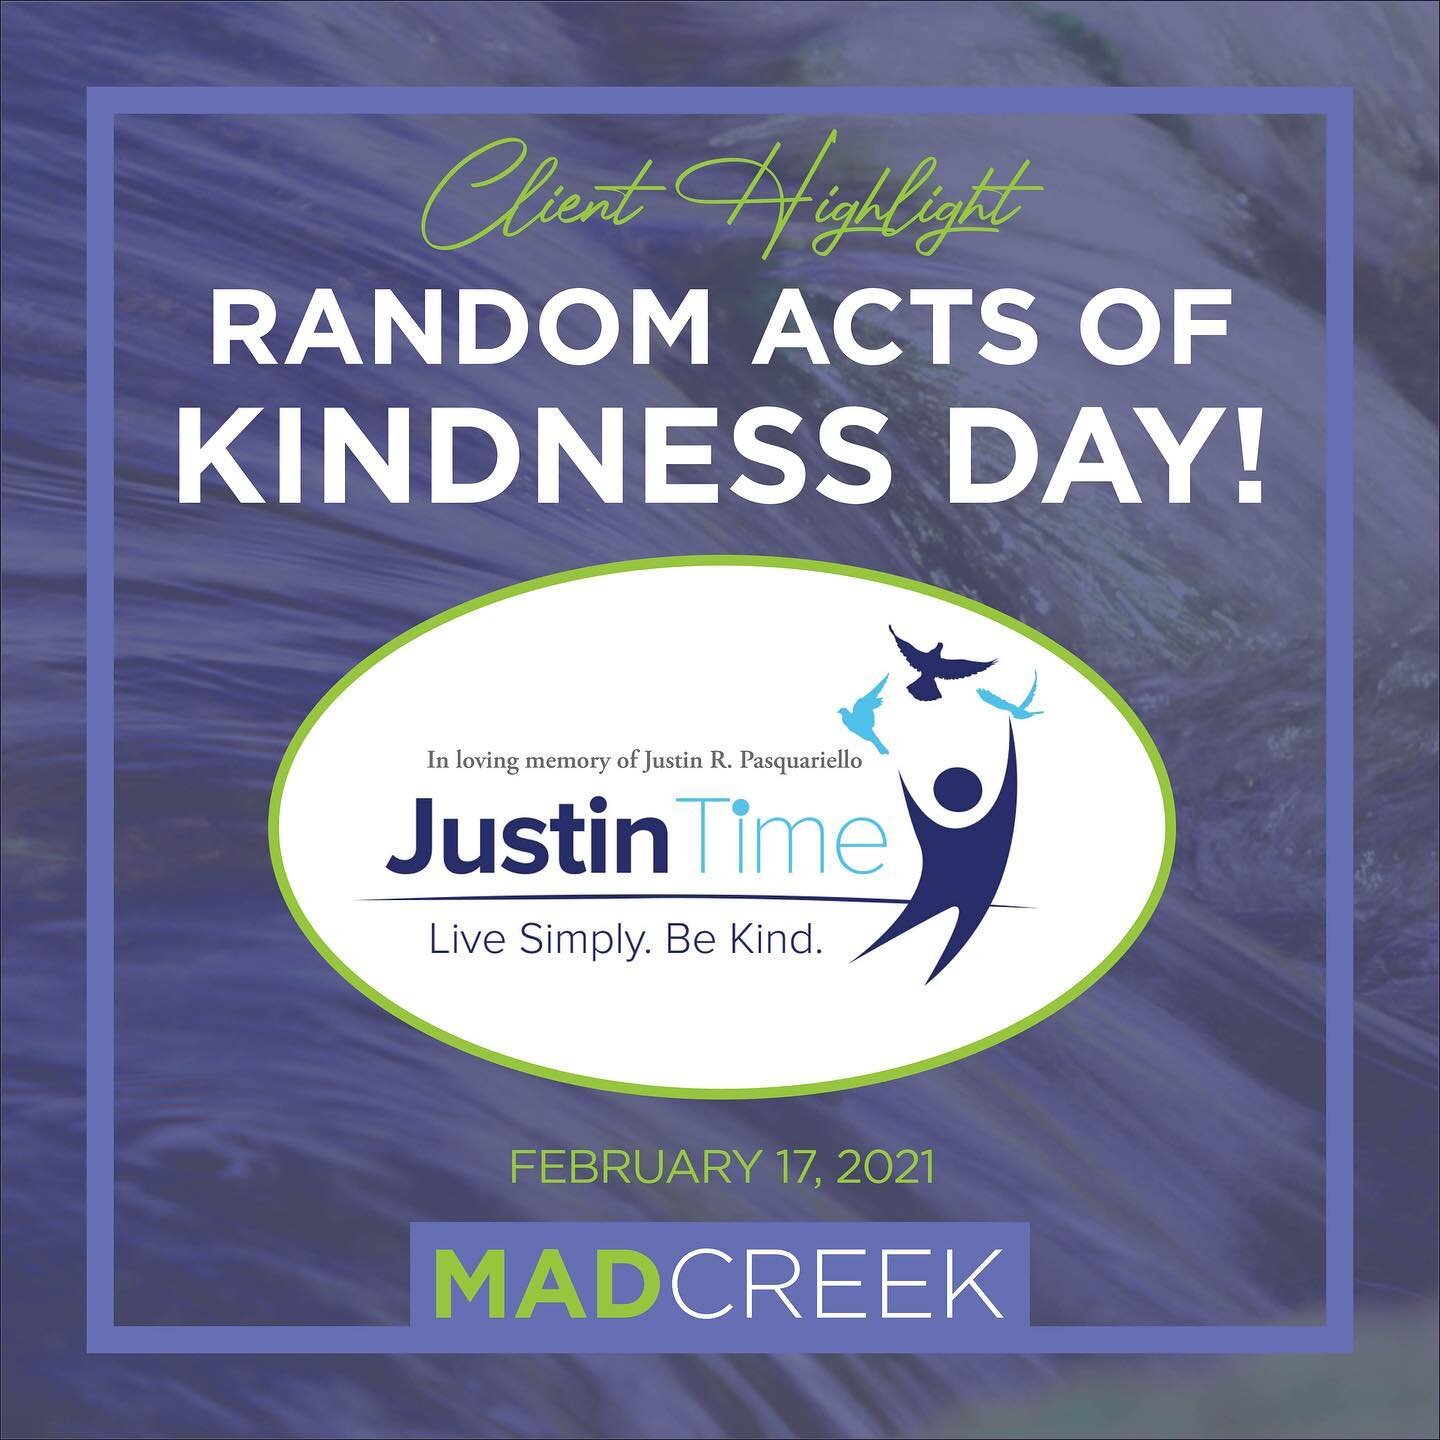 On this National #RandomActsofKindnessDay we would like to take the opportunity to highlight our @madcreekllc client The @justintimefoundation a #nonprofitorganization whose mission is to provide timely support for children/families who suffer the un